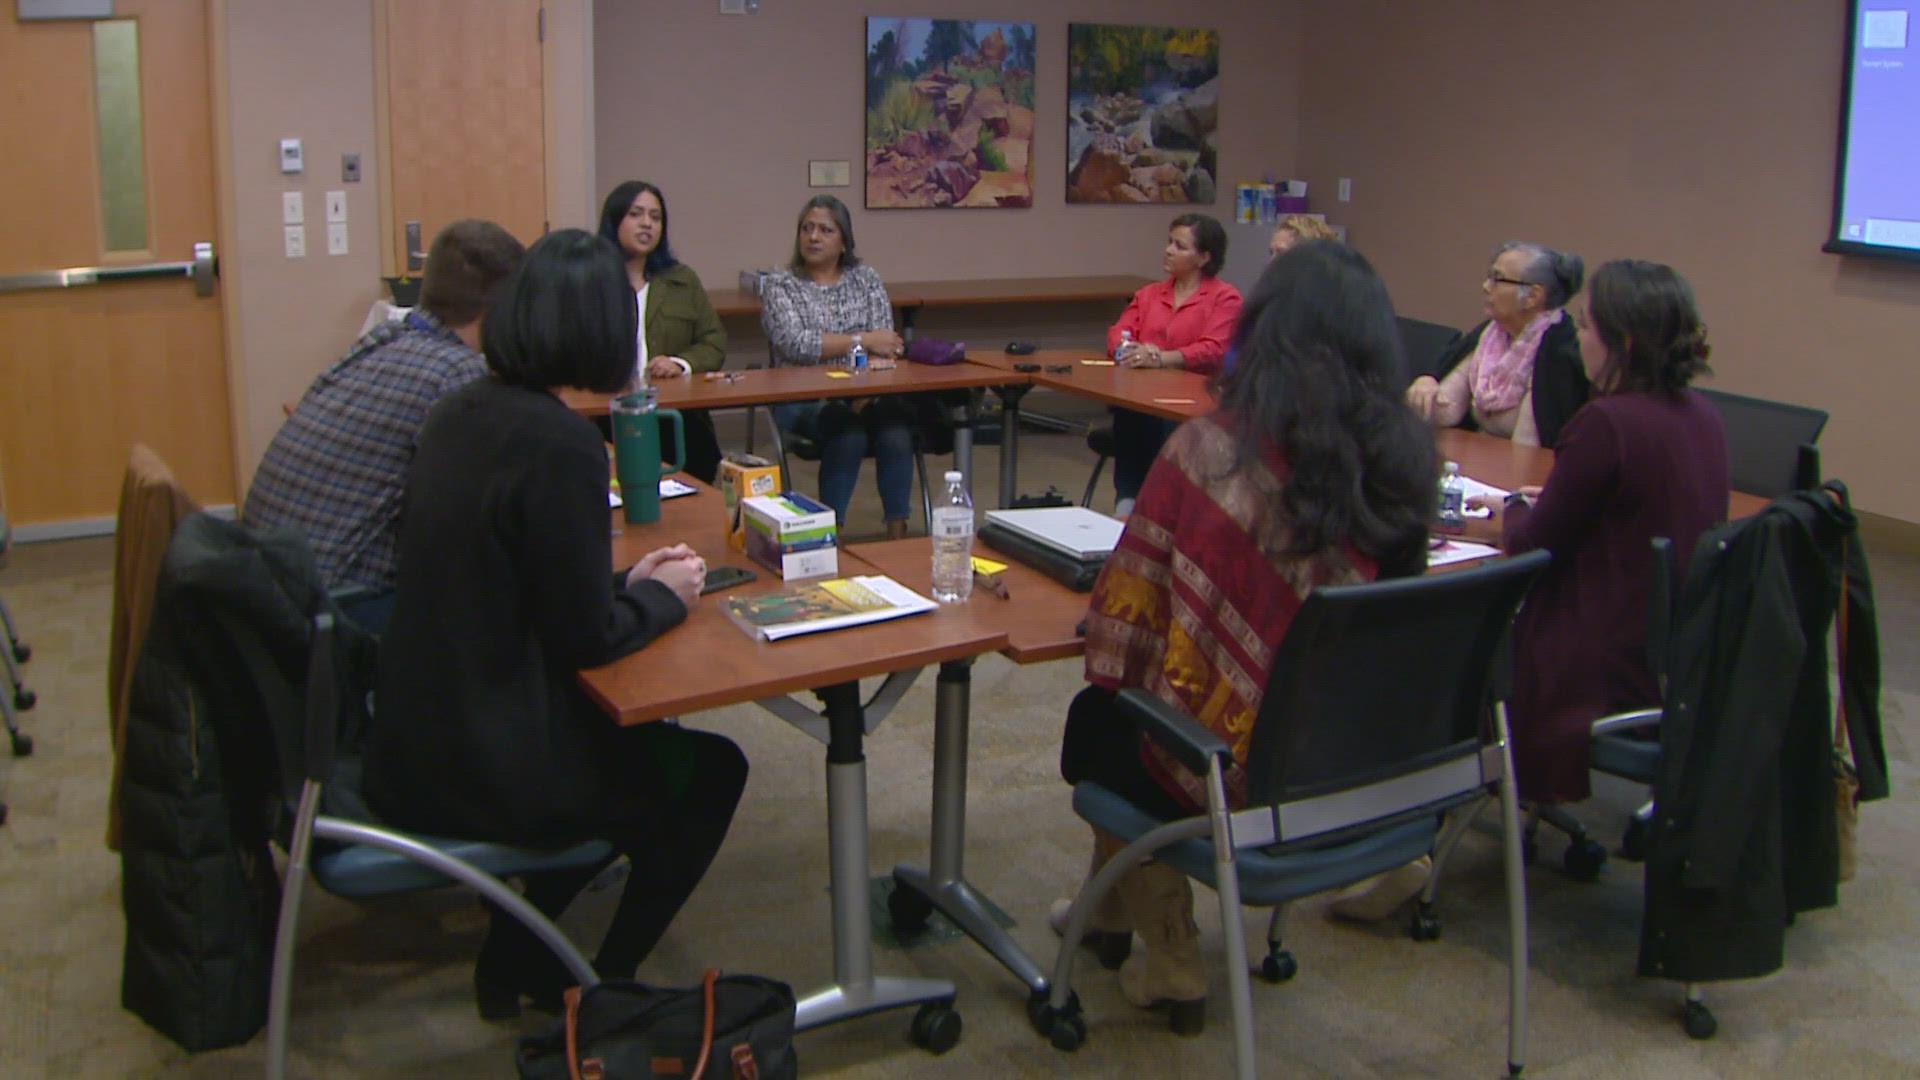 Platte Valley Medical Center has created a support group for Spanish speakers navigating cancer, helping those navigating a difficult diagnosis find community.